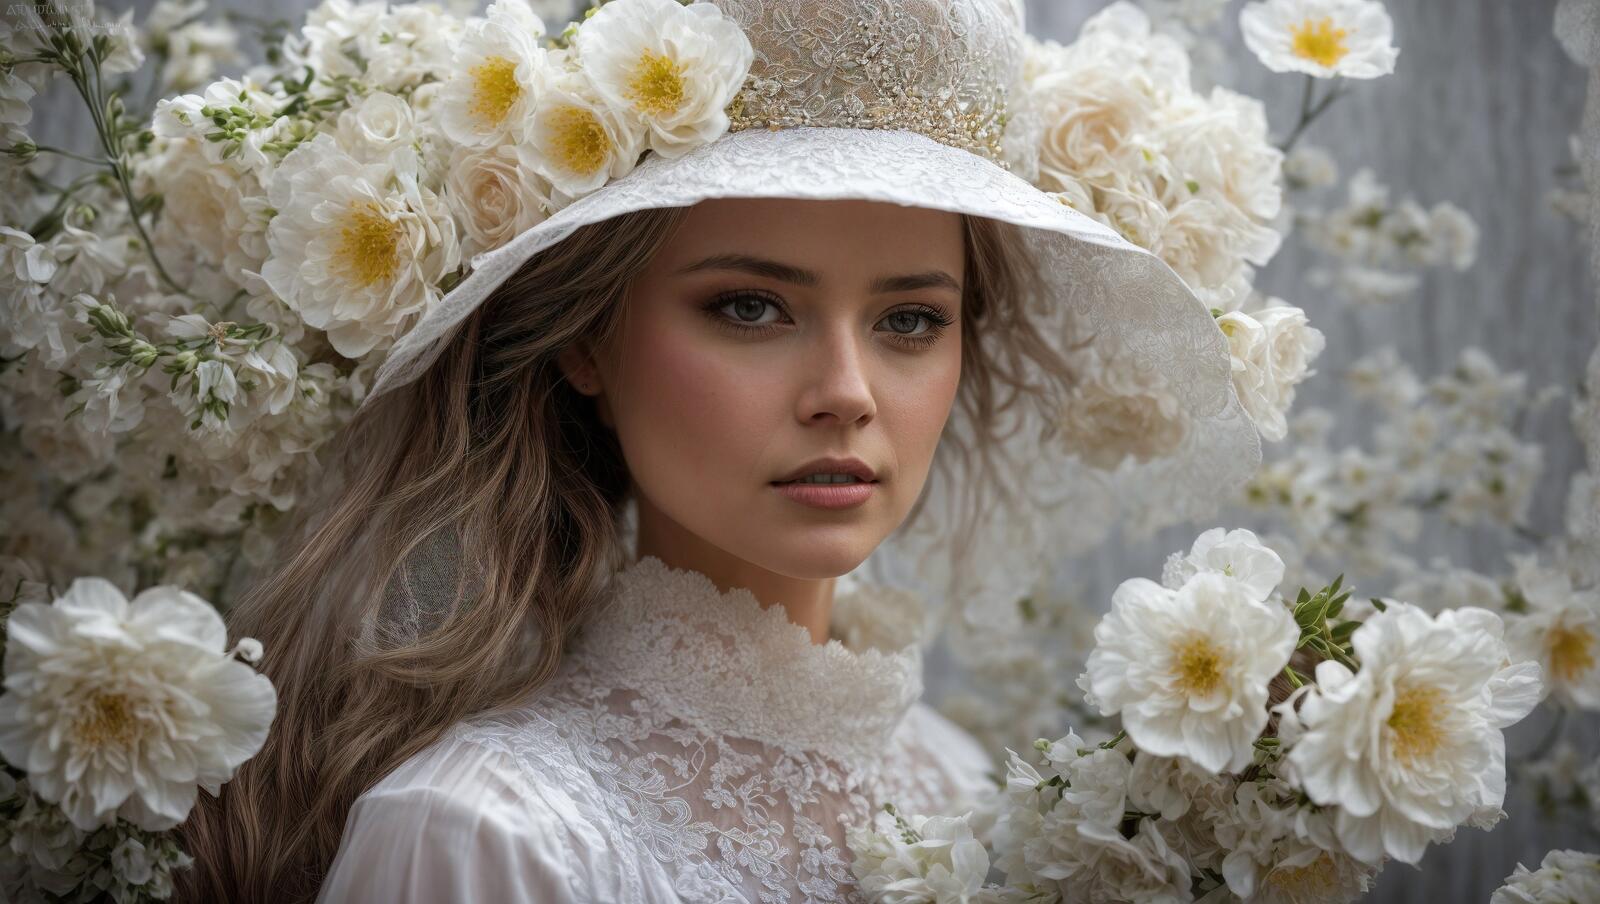 Free photo A woman wearing a white hat with long braids, dress, and flowers